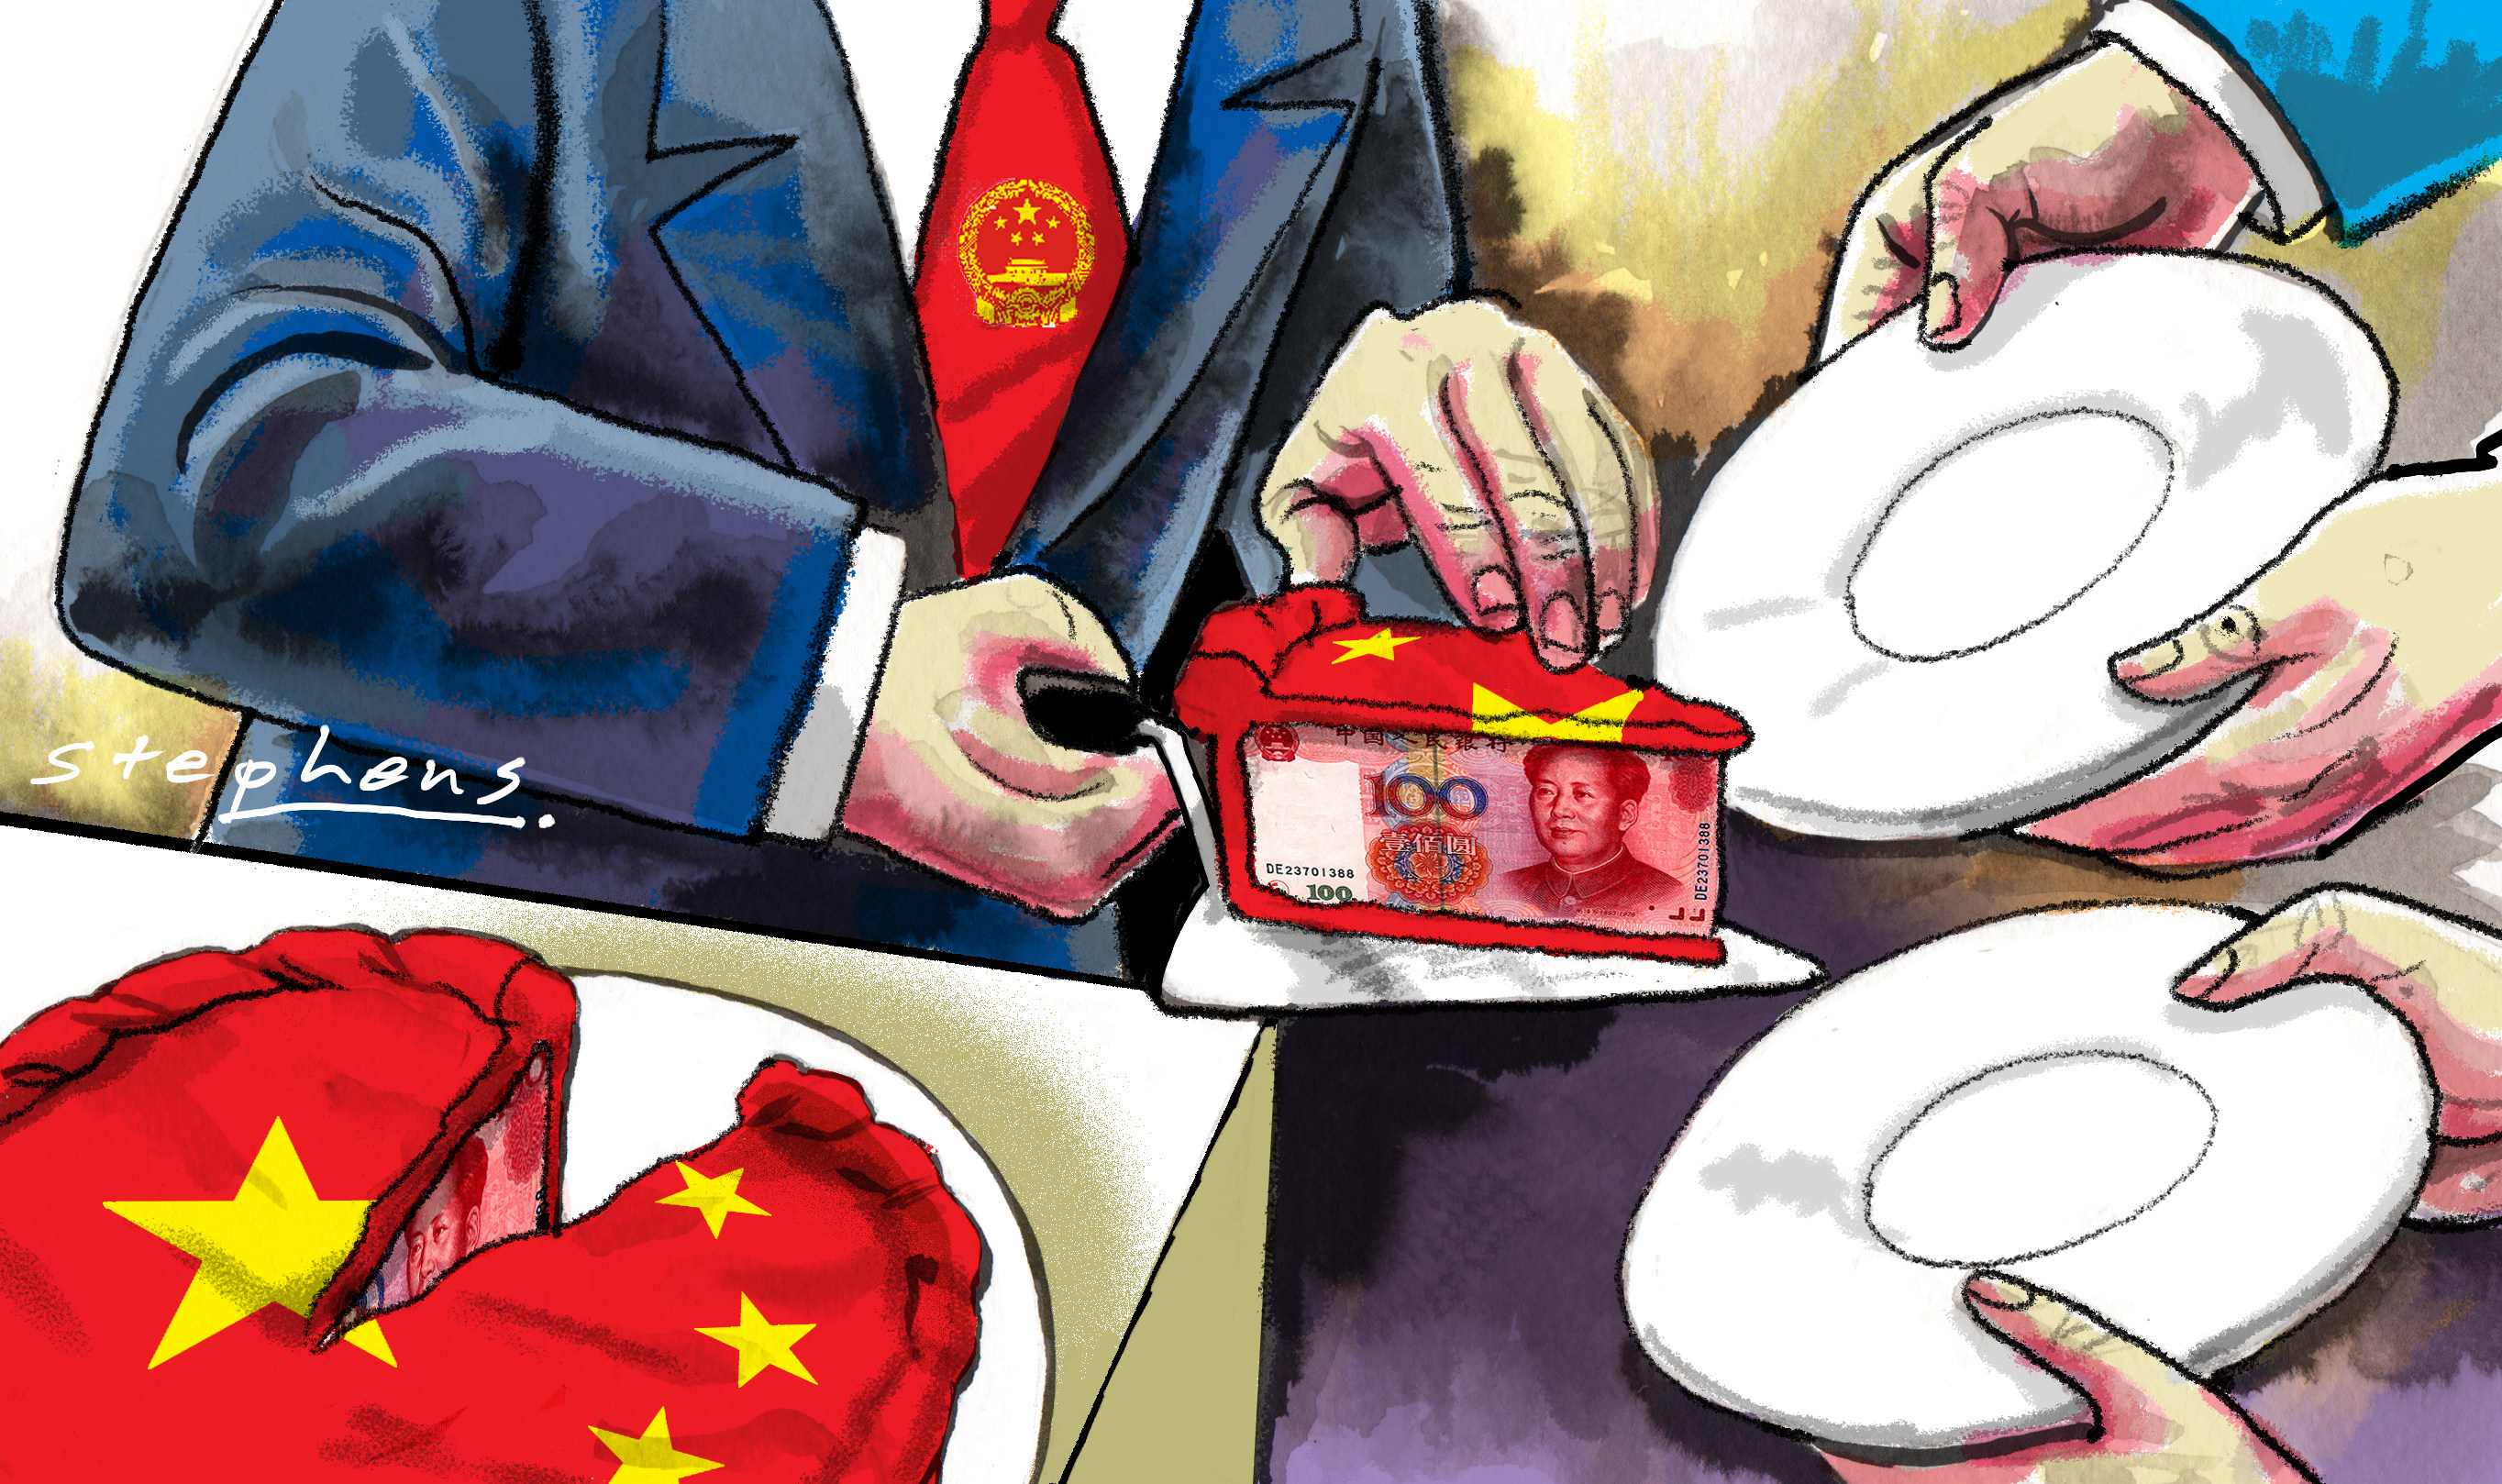 President Xi Jinping has been pushing for so-called common prosperity, which is aimed at narrowing the nation’s persistent wealth gap. Illustration: Craig Stephens